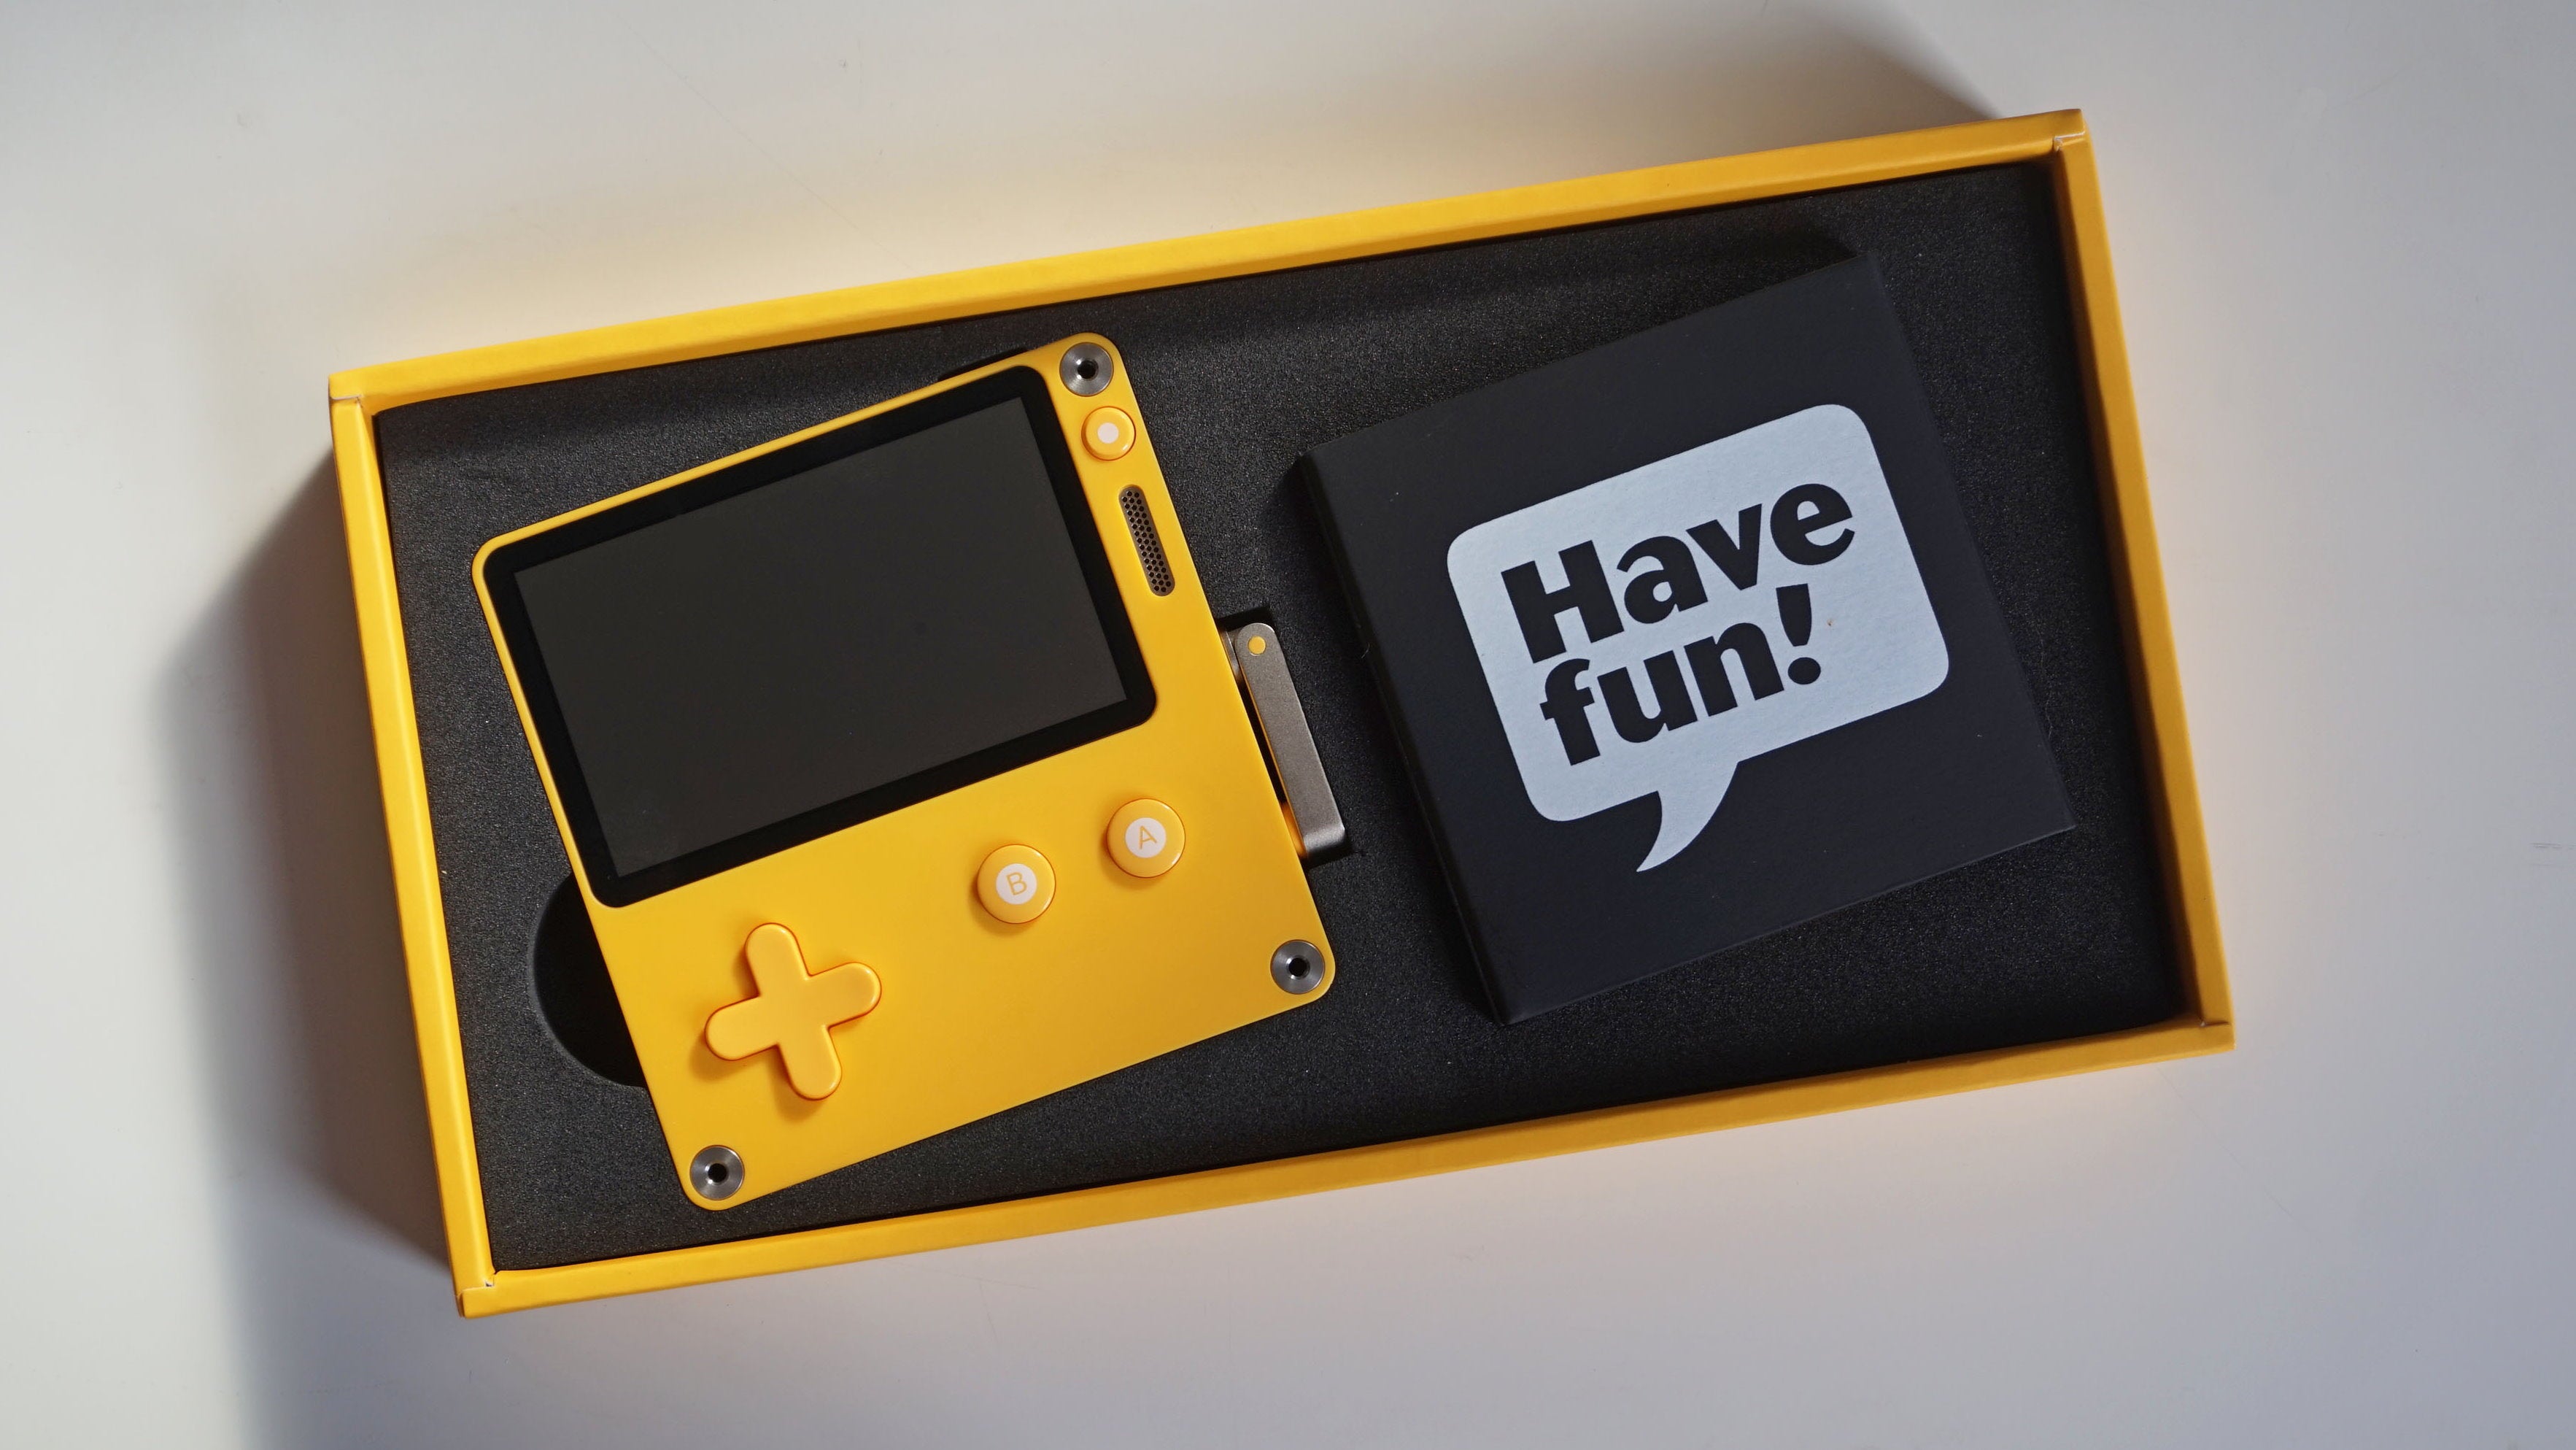 The Playdate inside its consumer packaging, with a cardboard USB wrapper saying 'Have Fun!' next to it